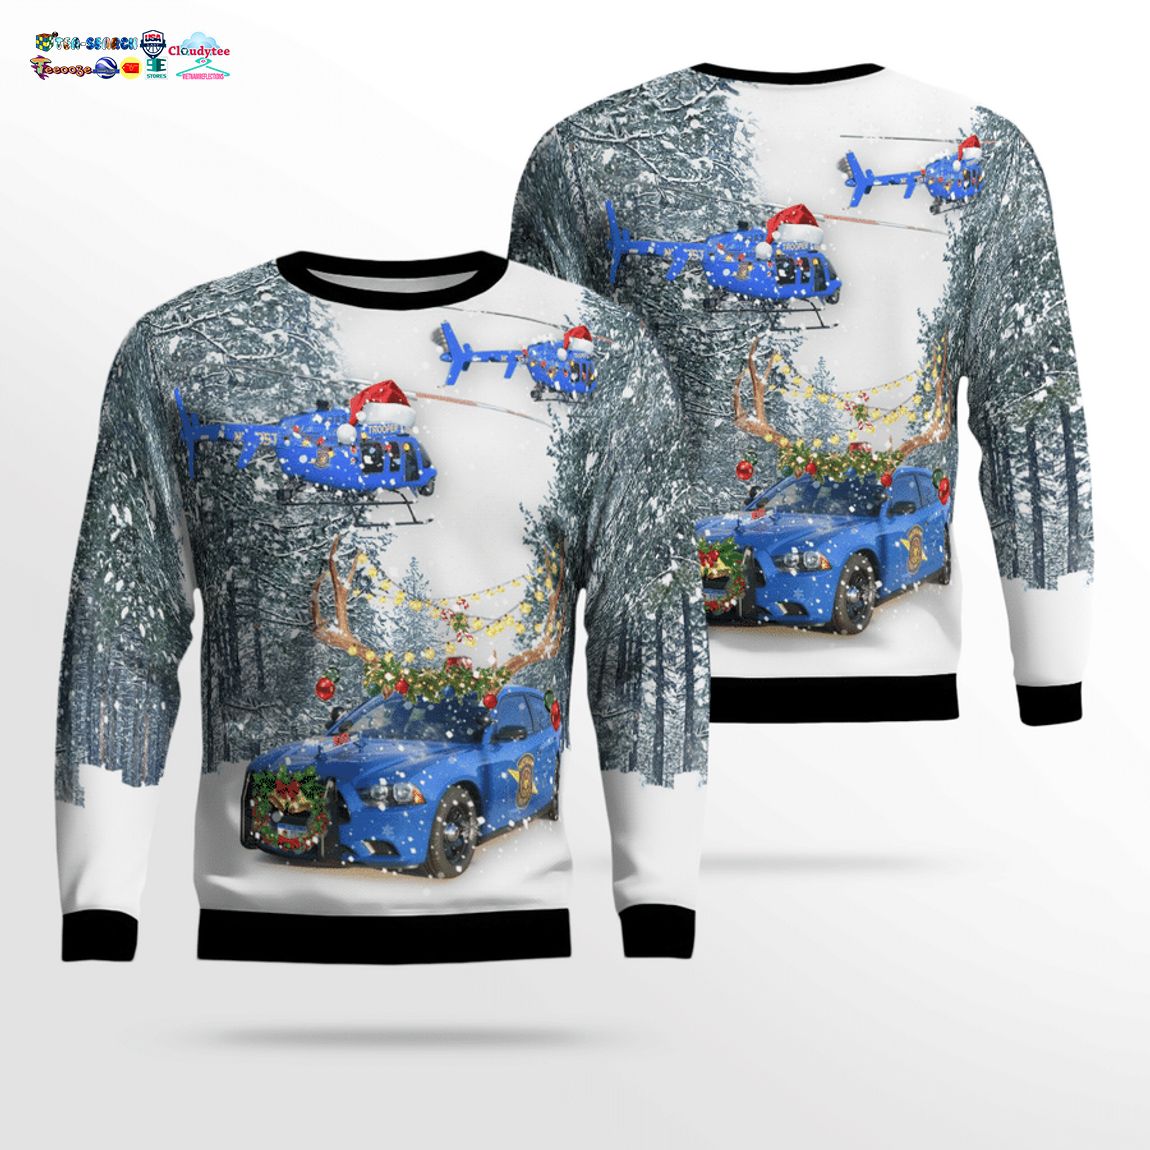 michigan-state-police-dodge-charger-and-helicopter-3d-christmas-sweater-1-YV9ko.jpg